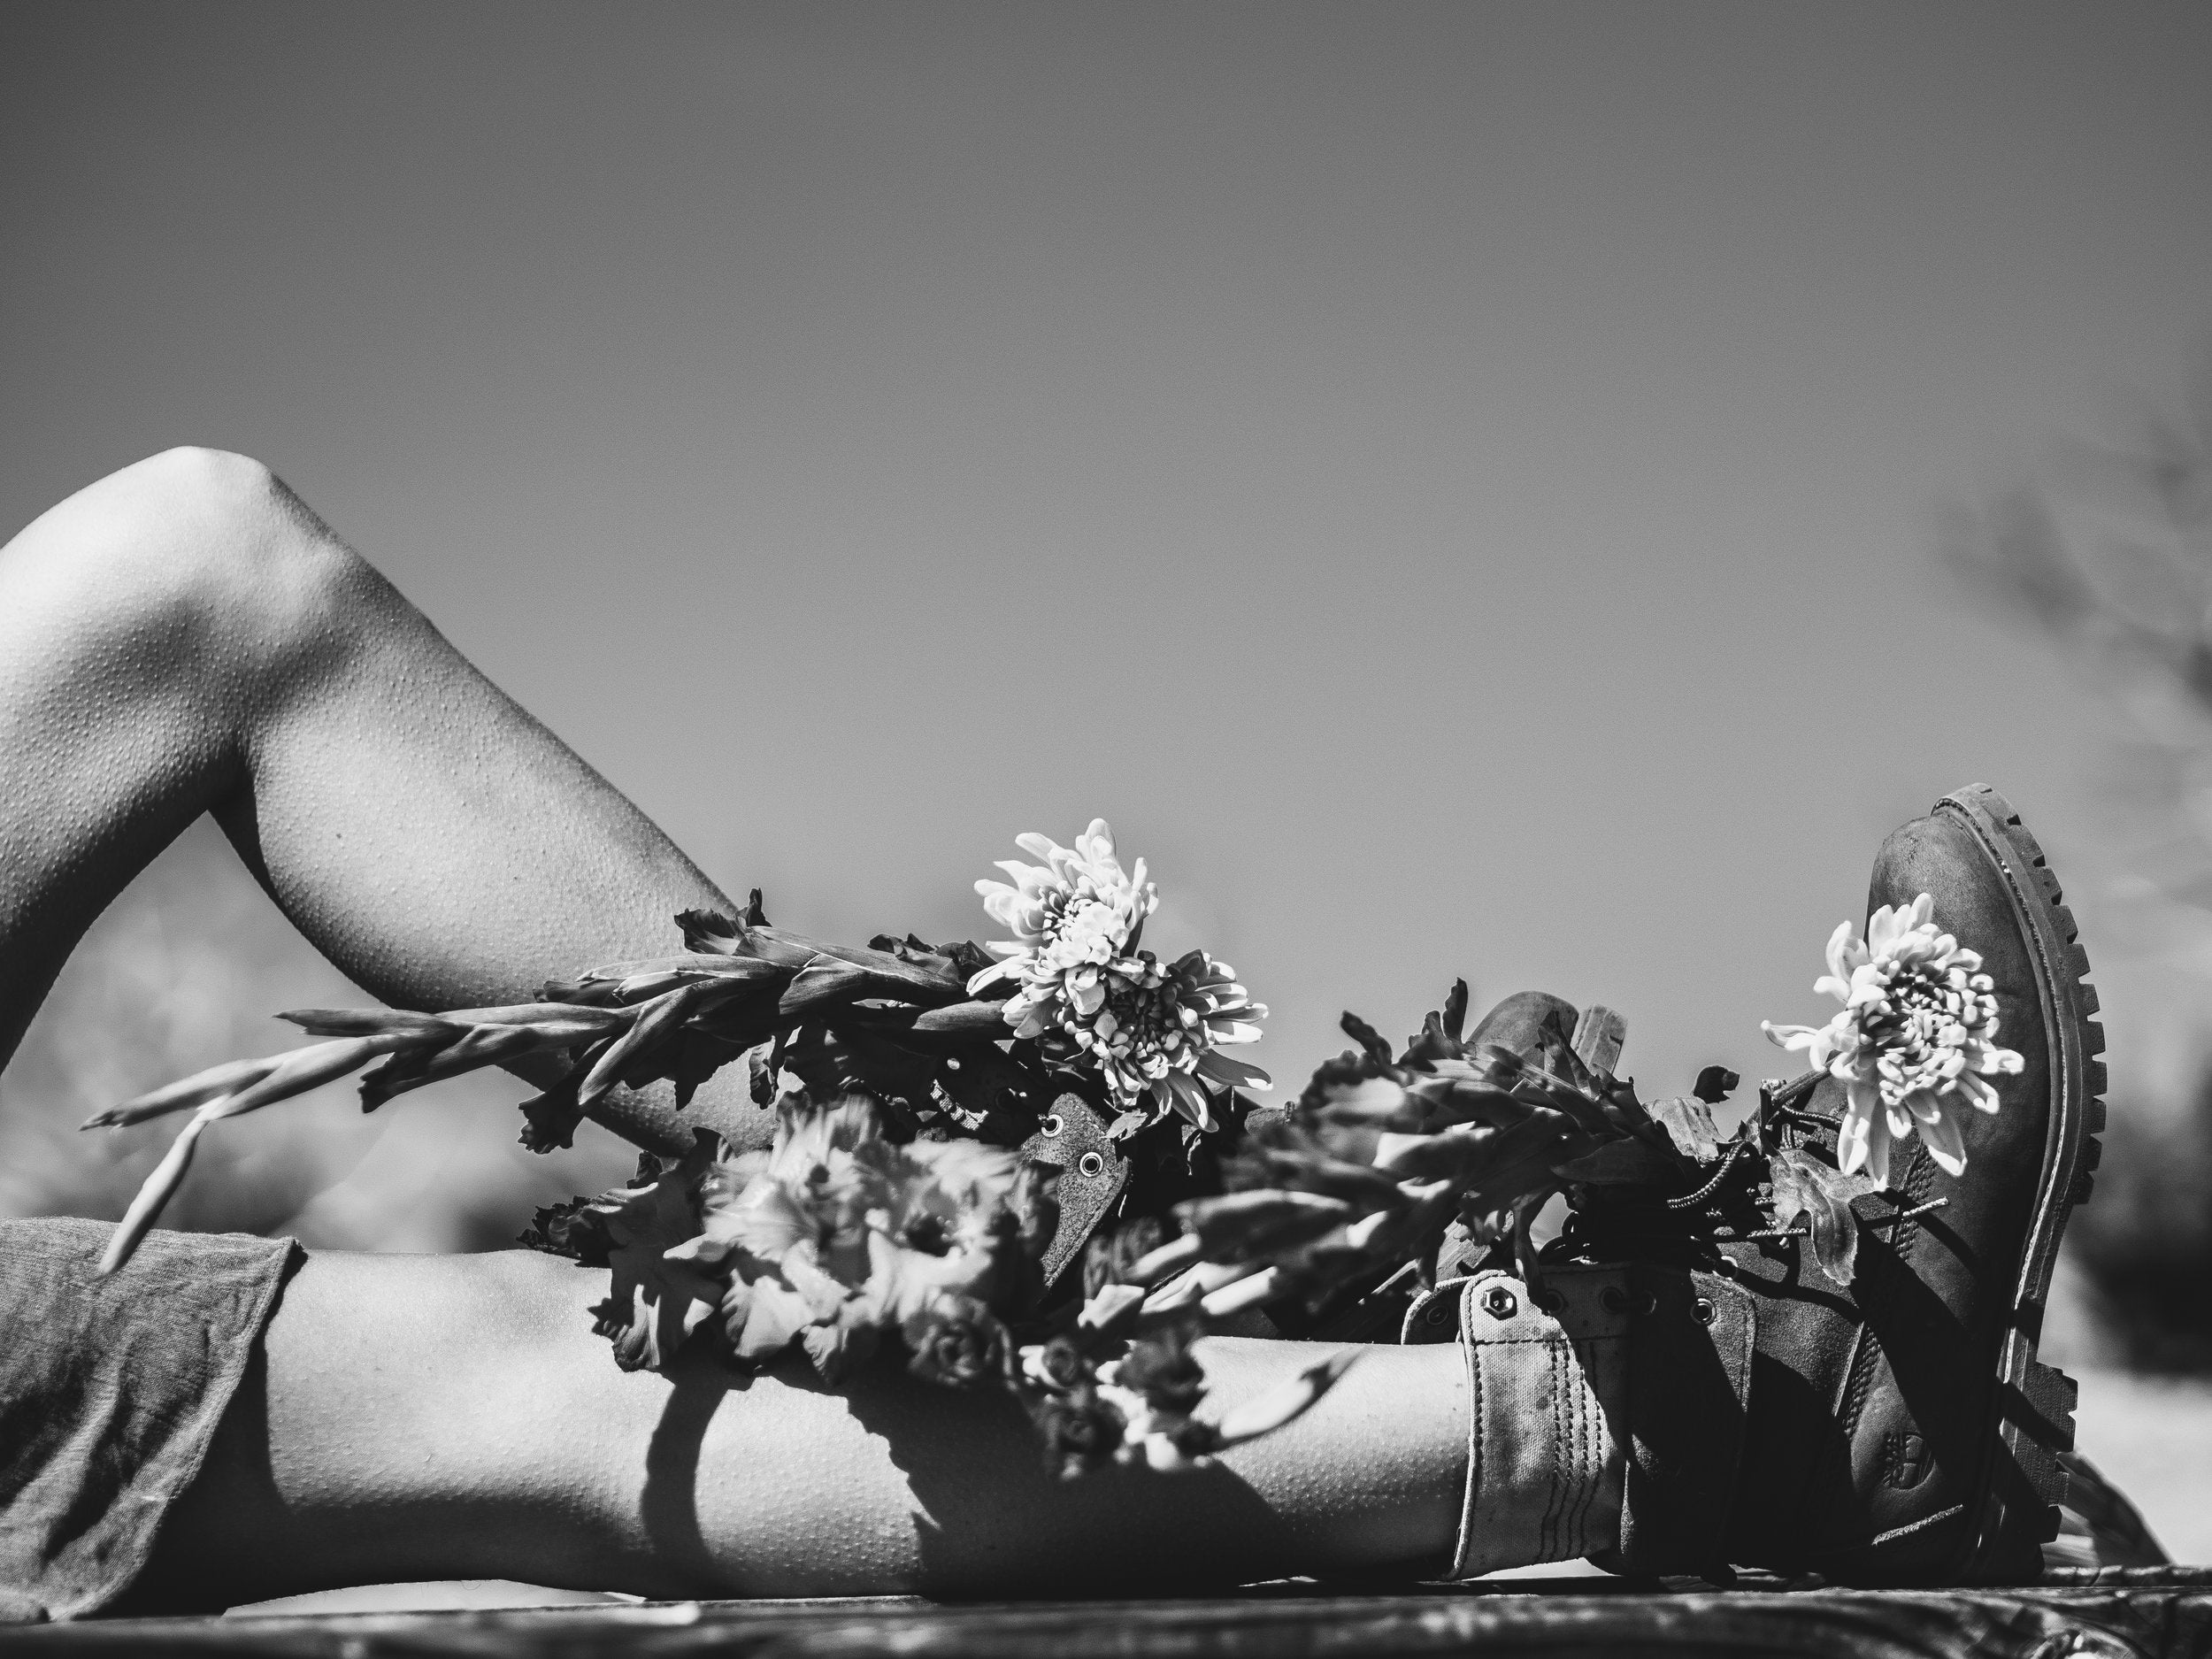 Black-and-white photo of a person's legs as they lie down. They are wearing boots and have flowers placed on their legs.